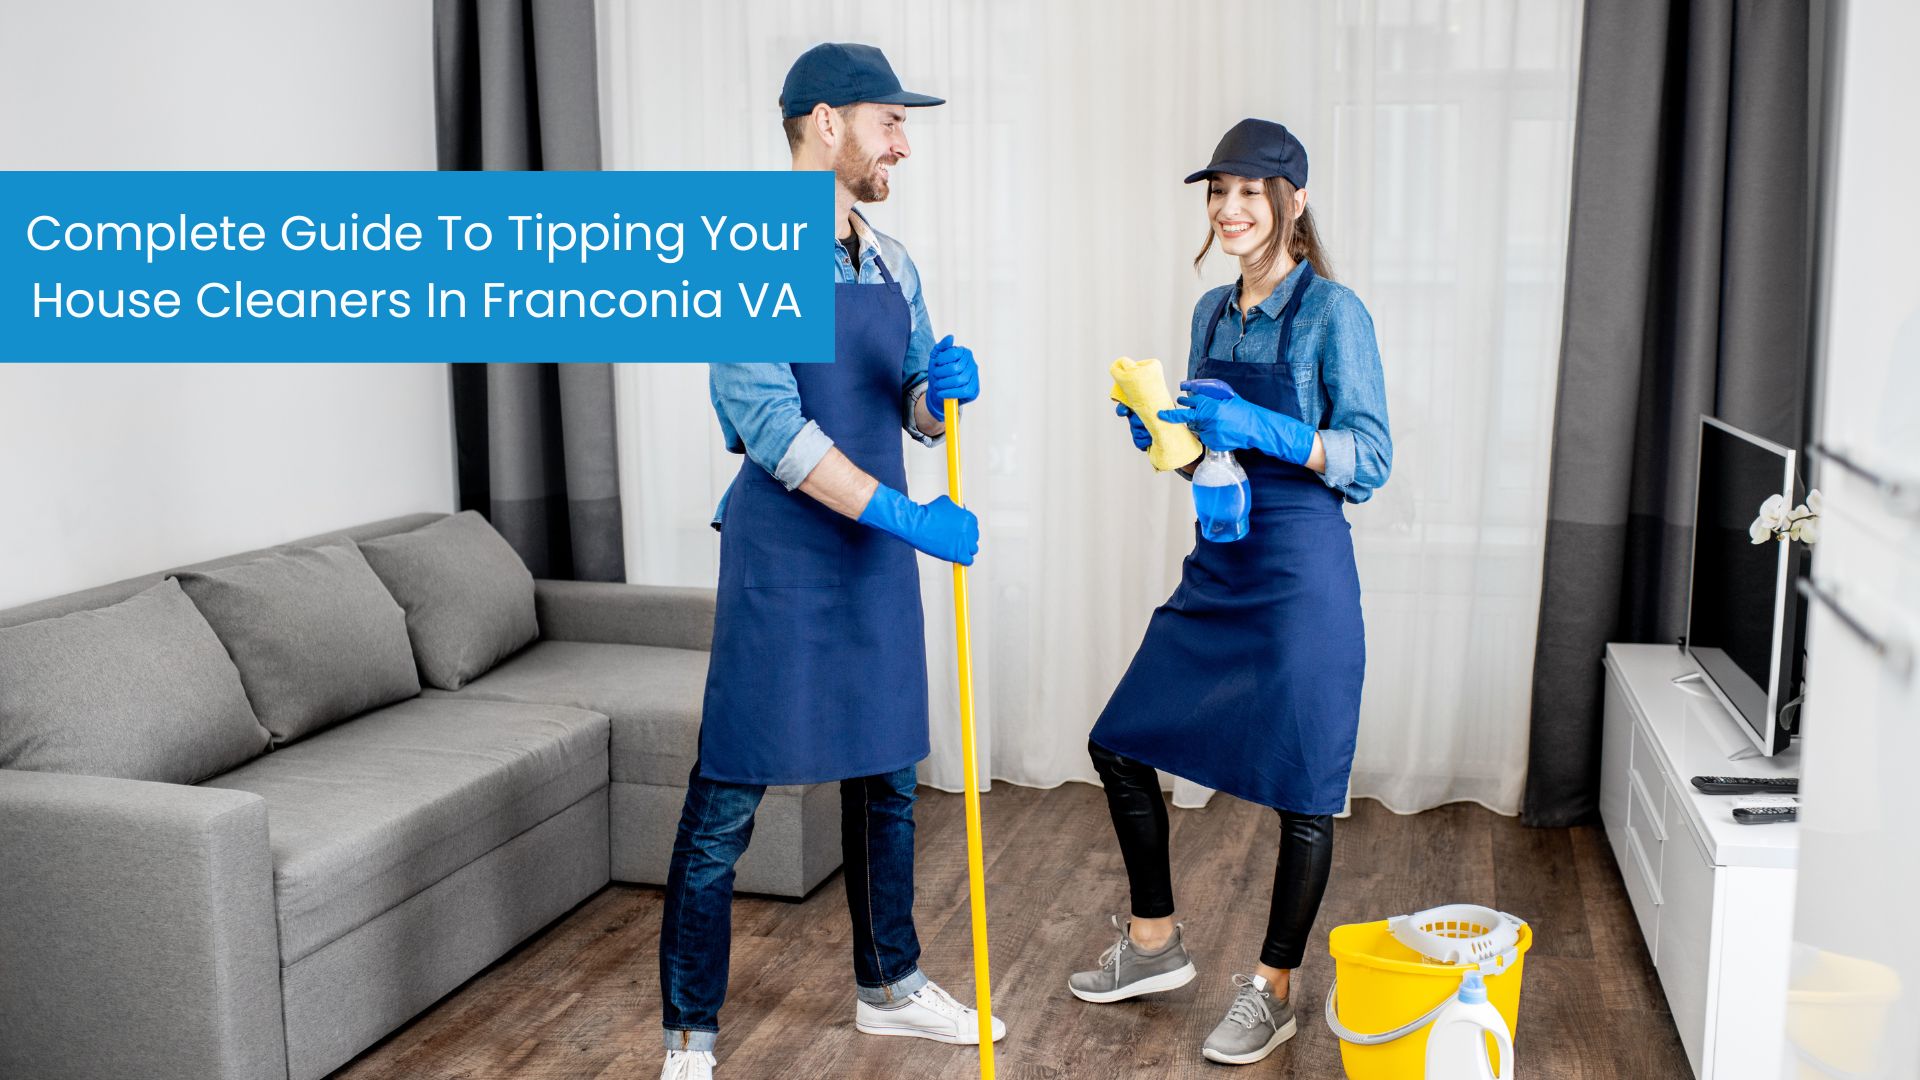 Complete Guide To Tipping Your House Cleaners in Franconia VA